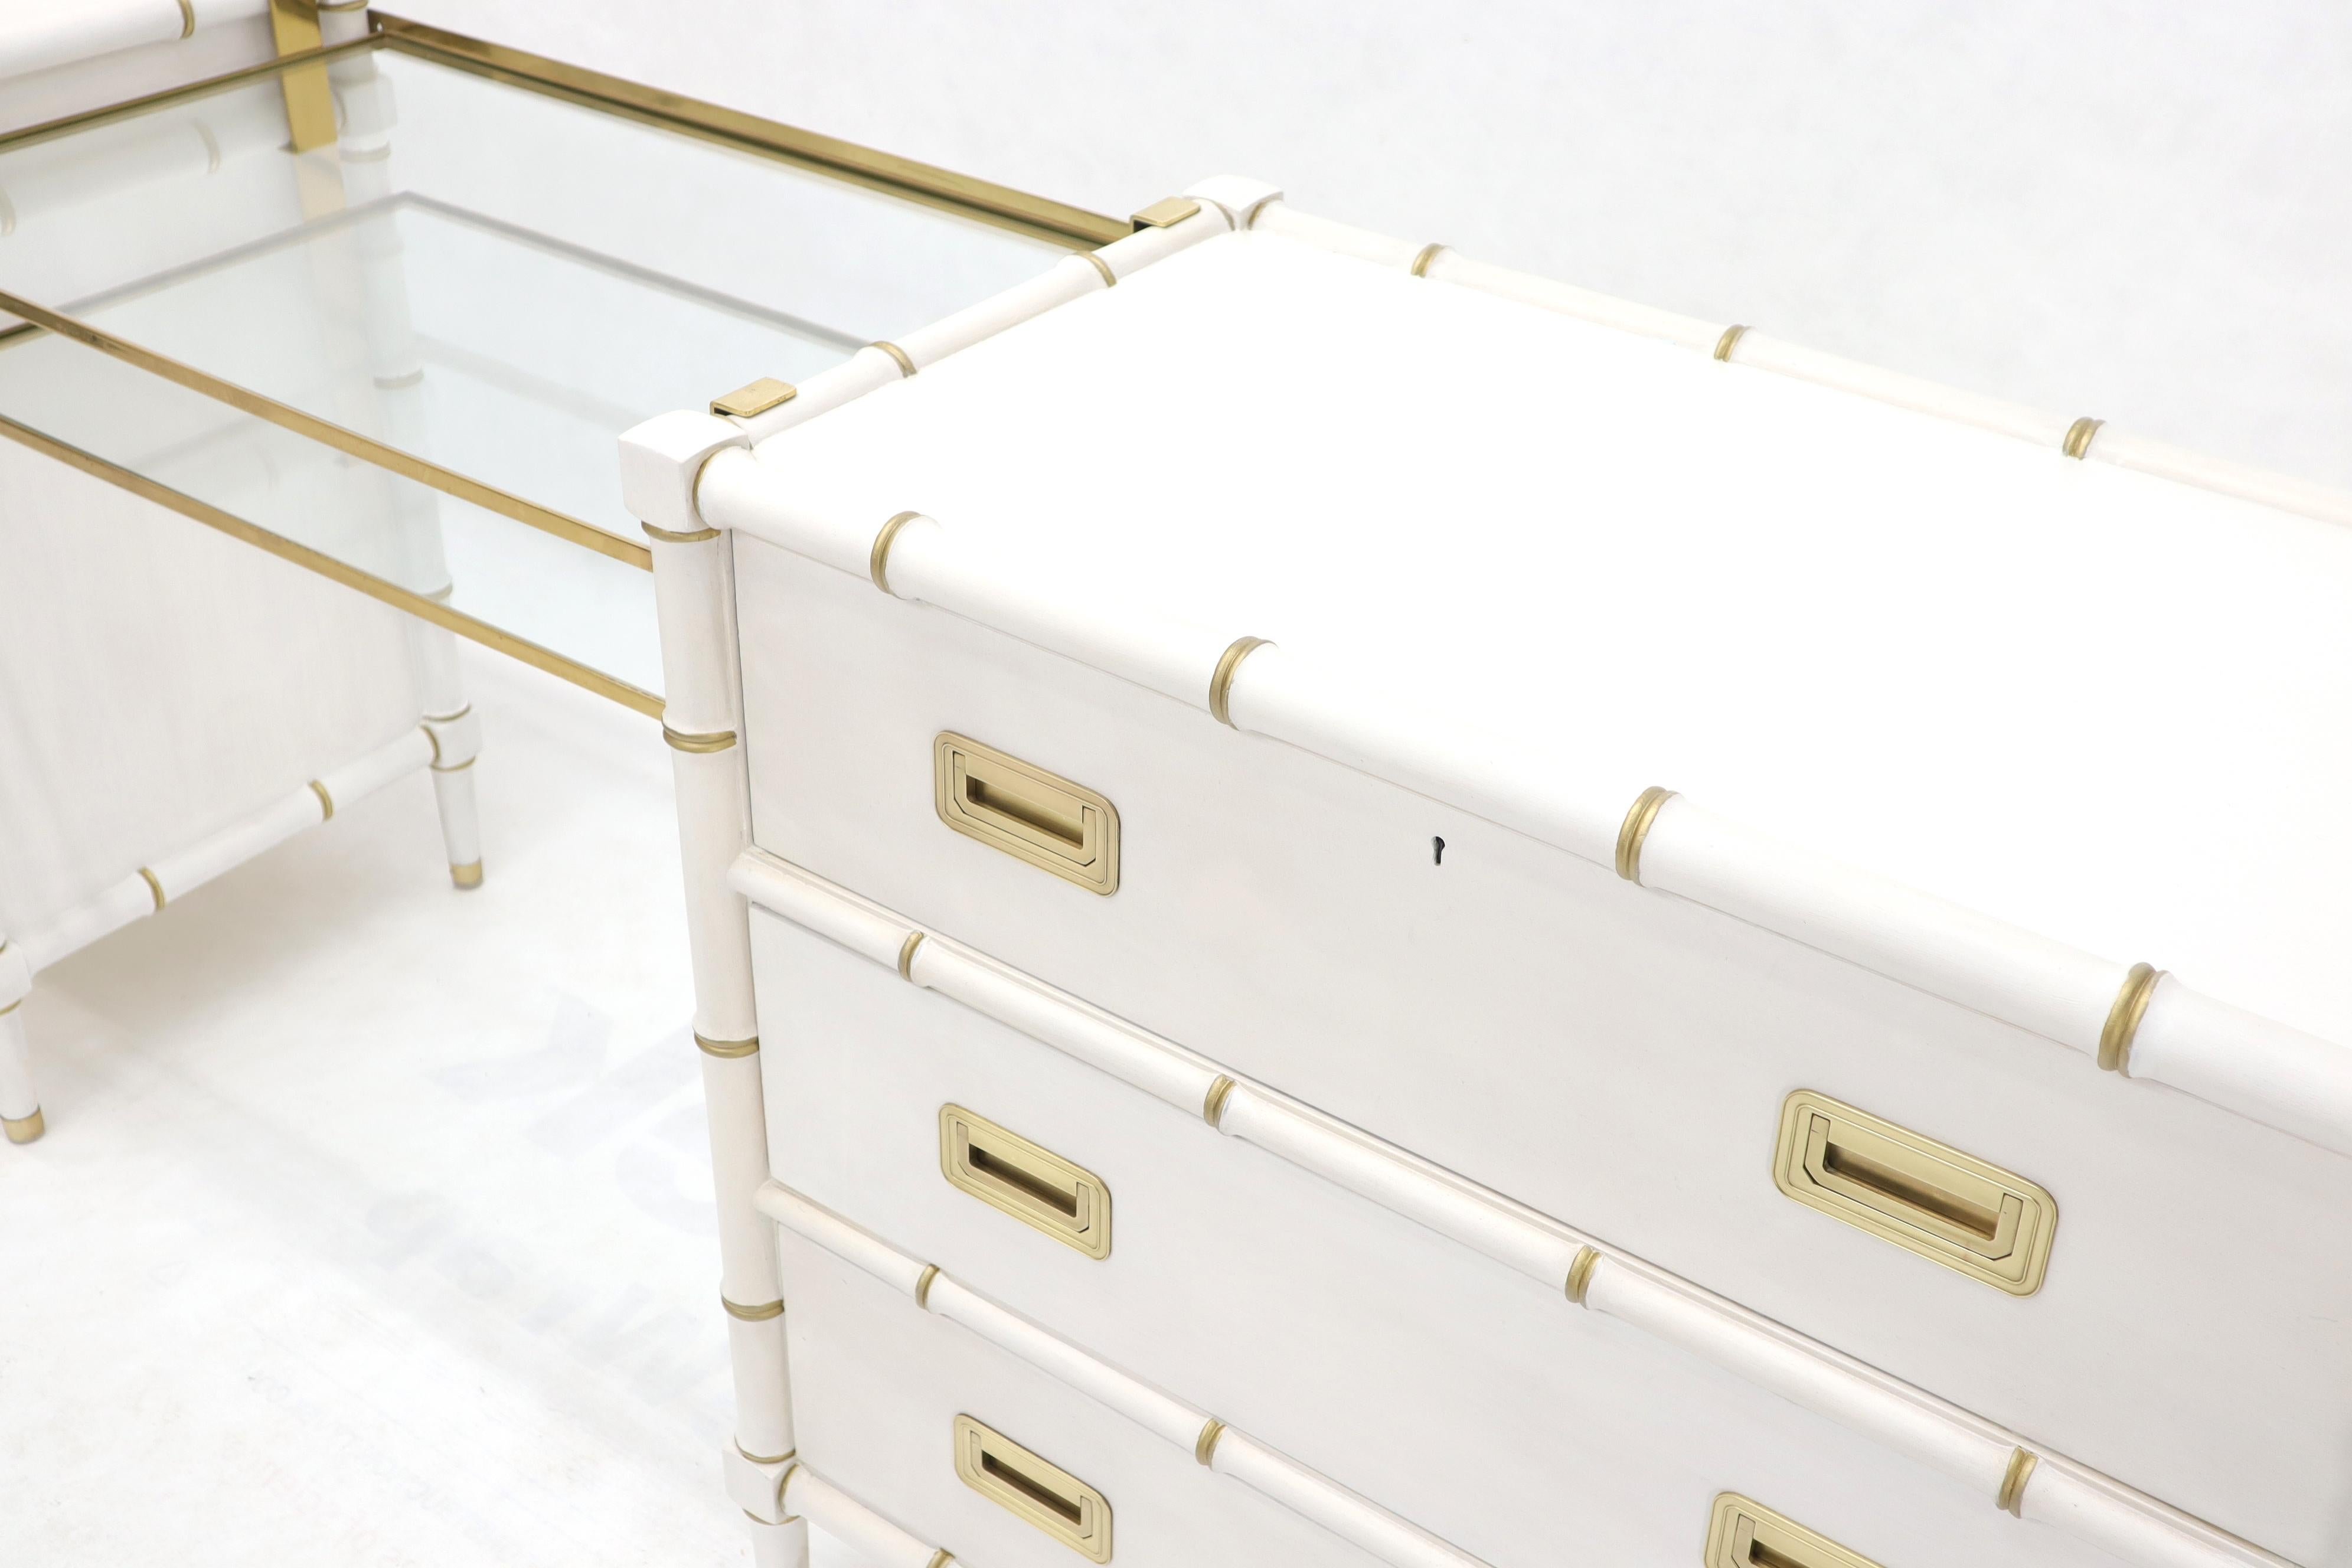 Pair of White Lacquer Brass Hardware Bachelor Chest with Suspended Brass Vanity For Sale 3